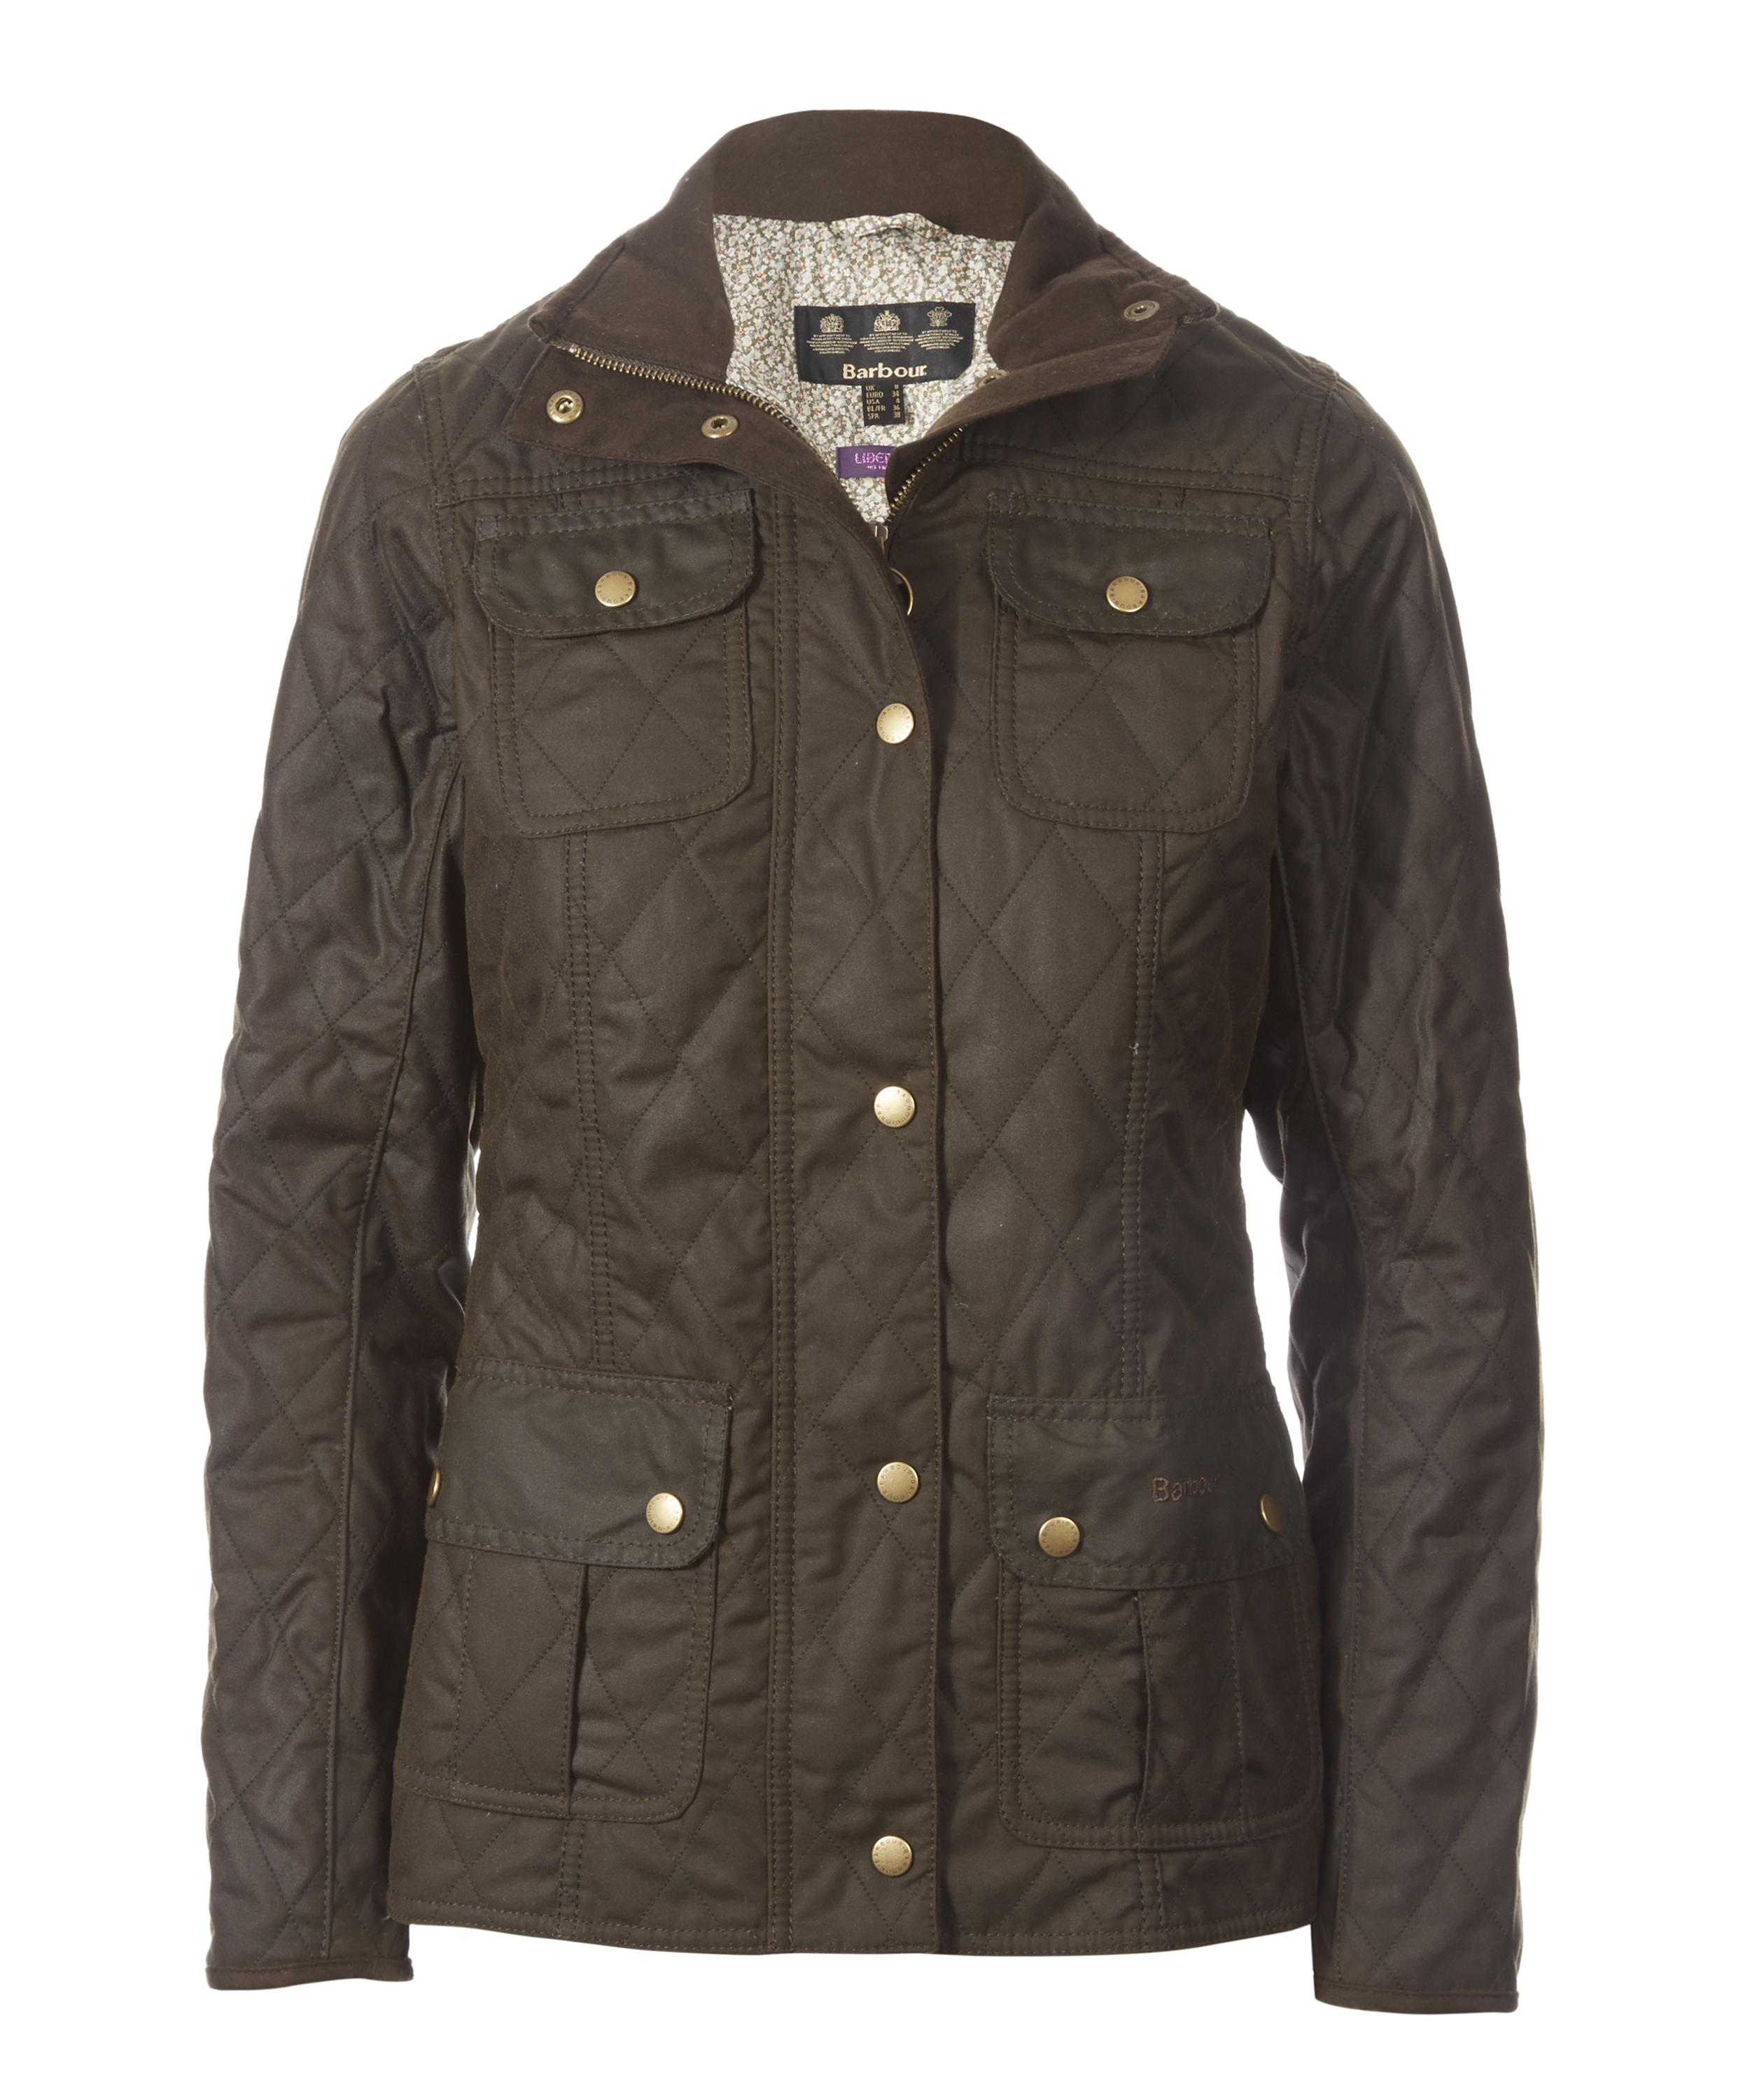 Barbour Womenswear | Barbour | Brands | Liberty London